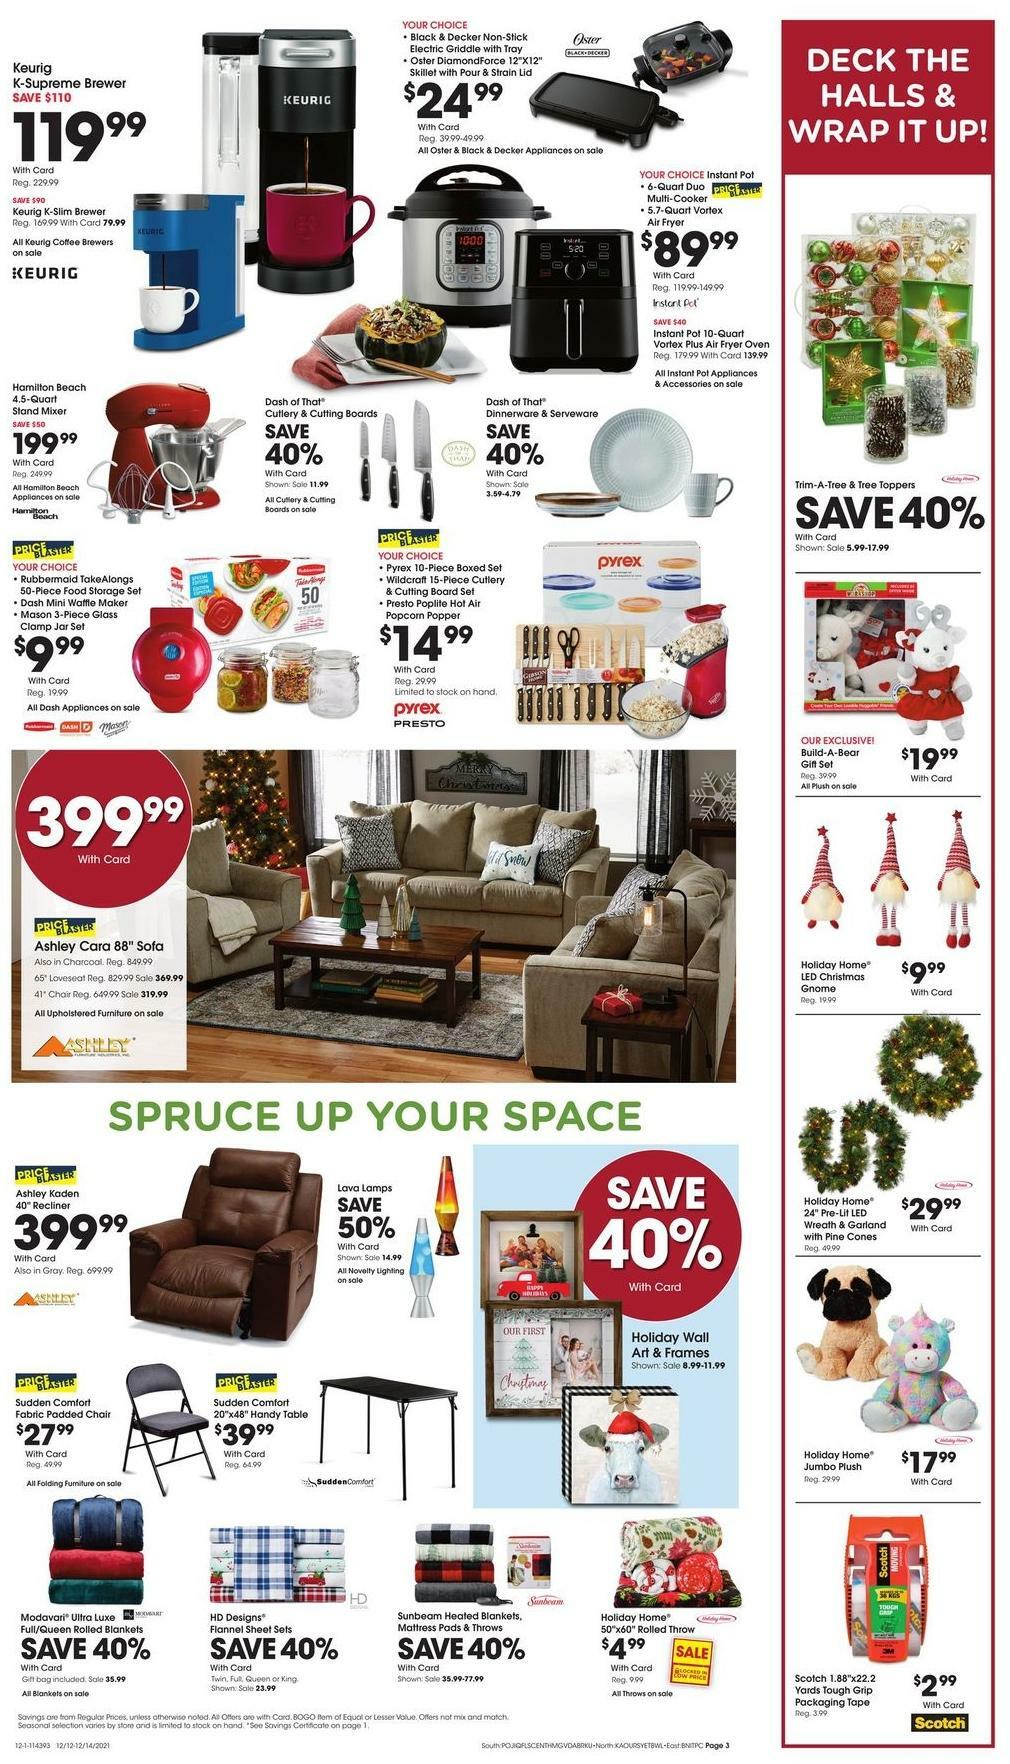 Fred Meyer 3-Day Sale Weekly Ad from December 12